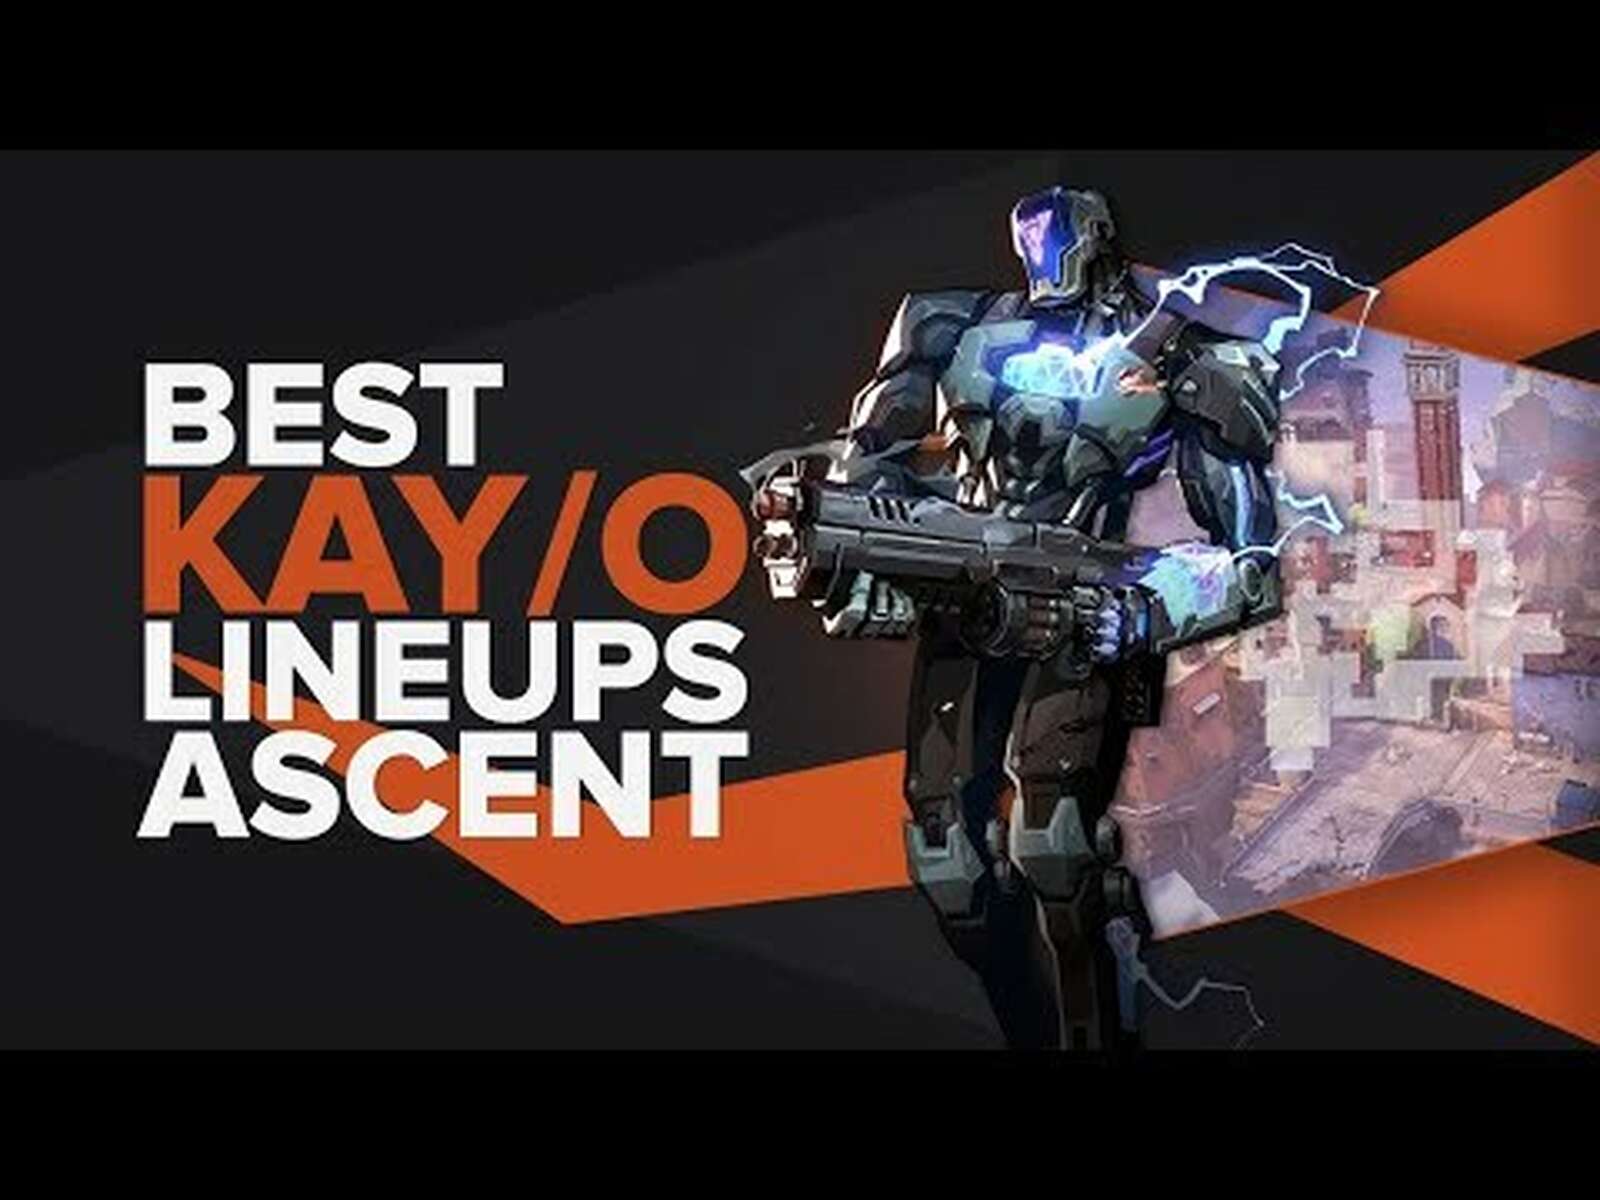 The Best Kayo Lineups on Ascent